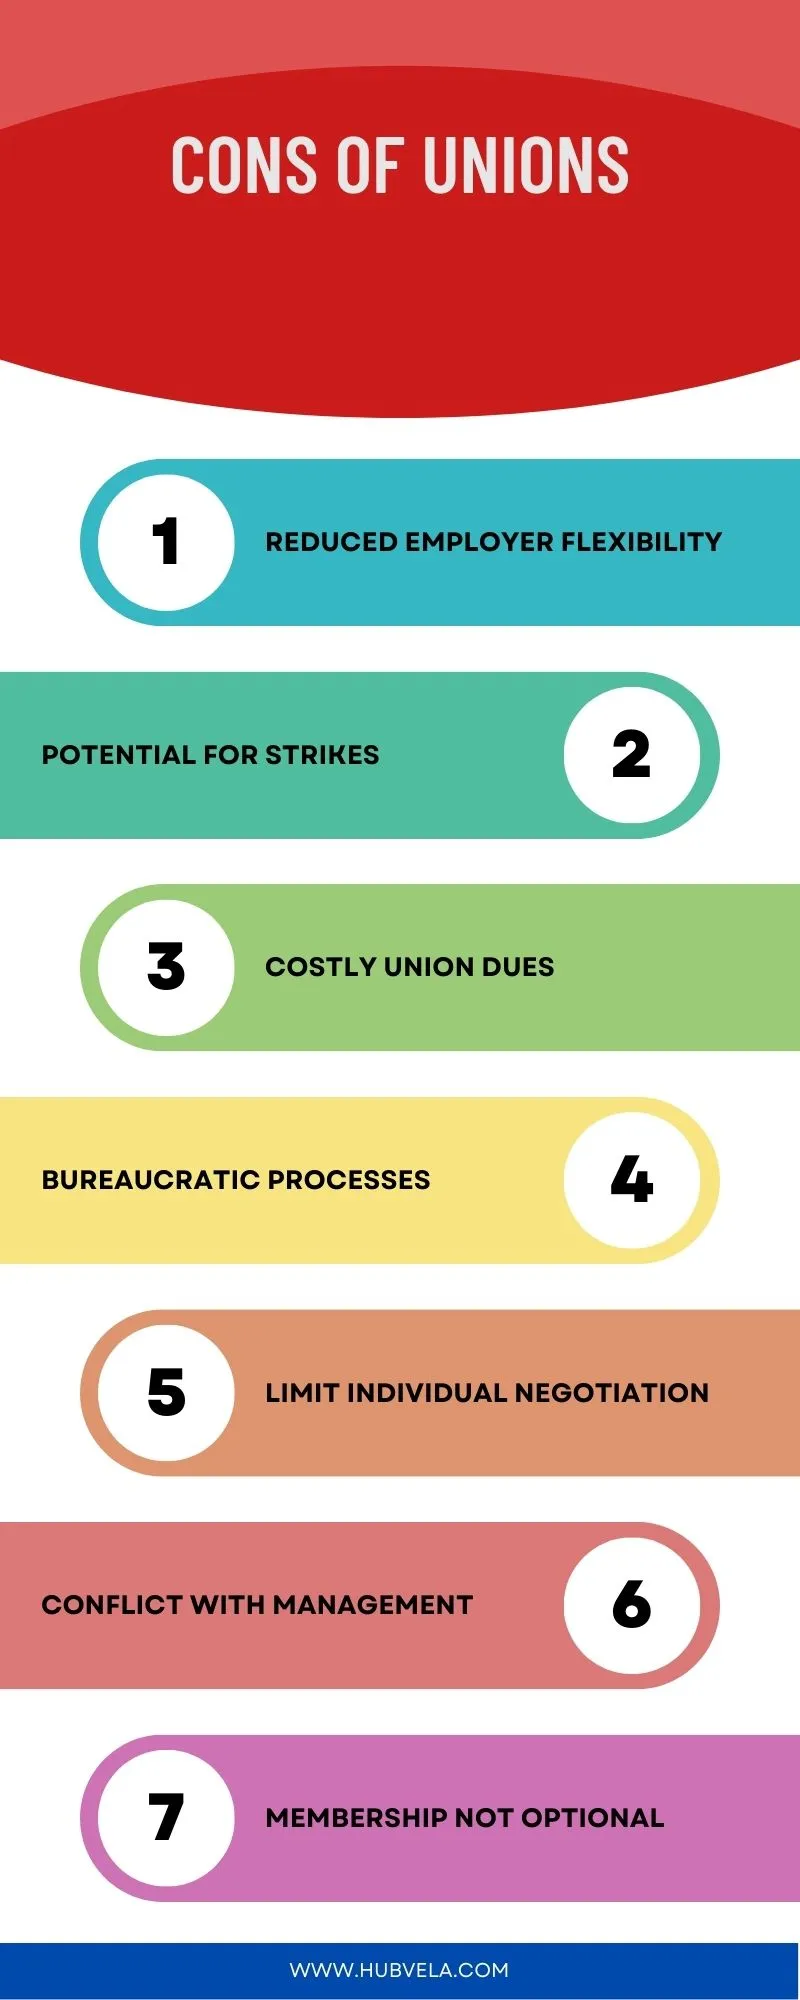 Cons of Unions Infographic